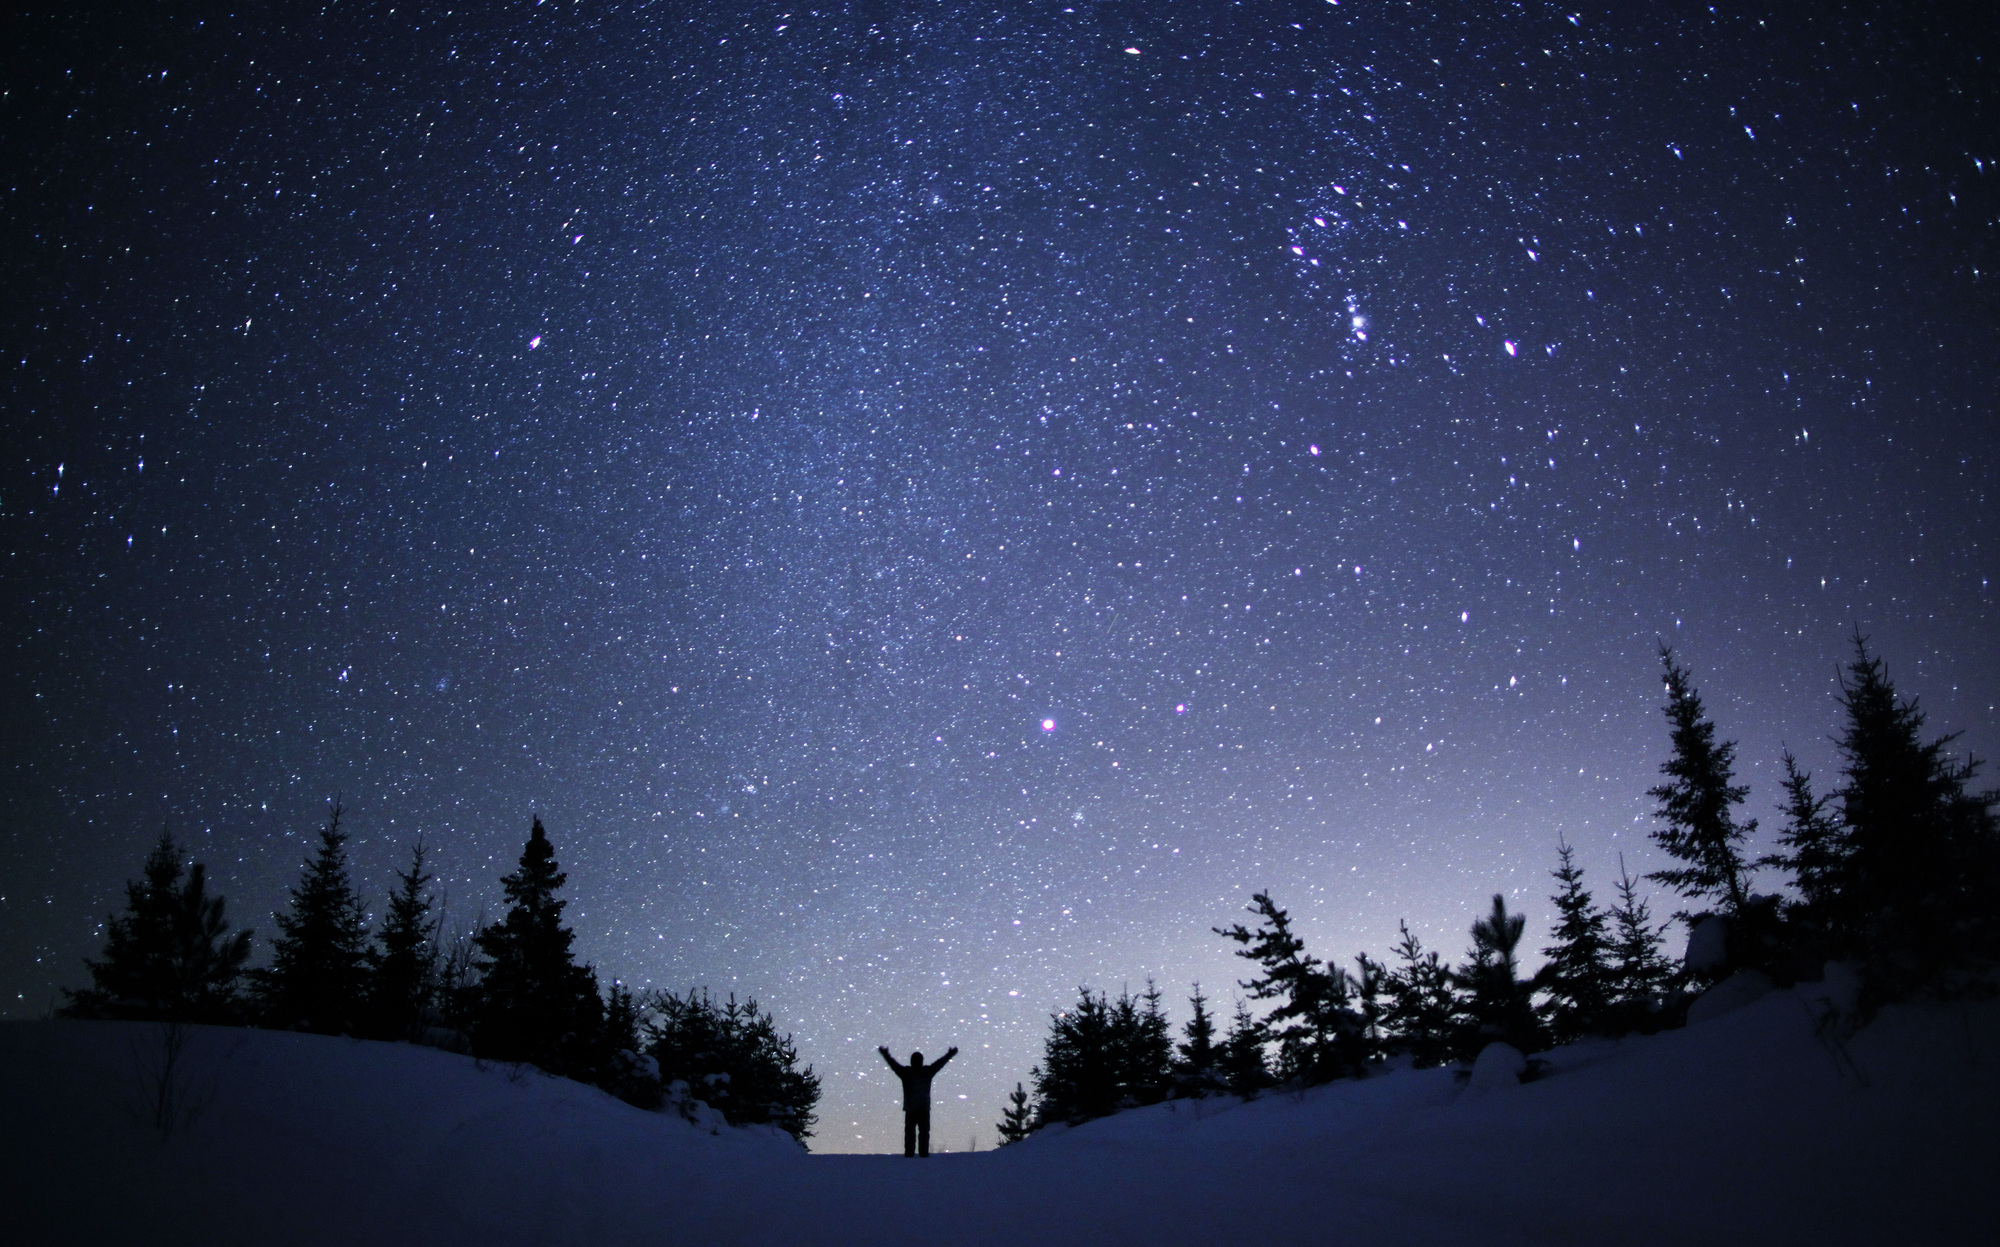 Best Things to See in the Winter Sky